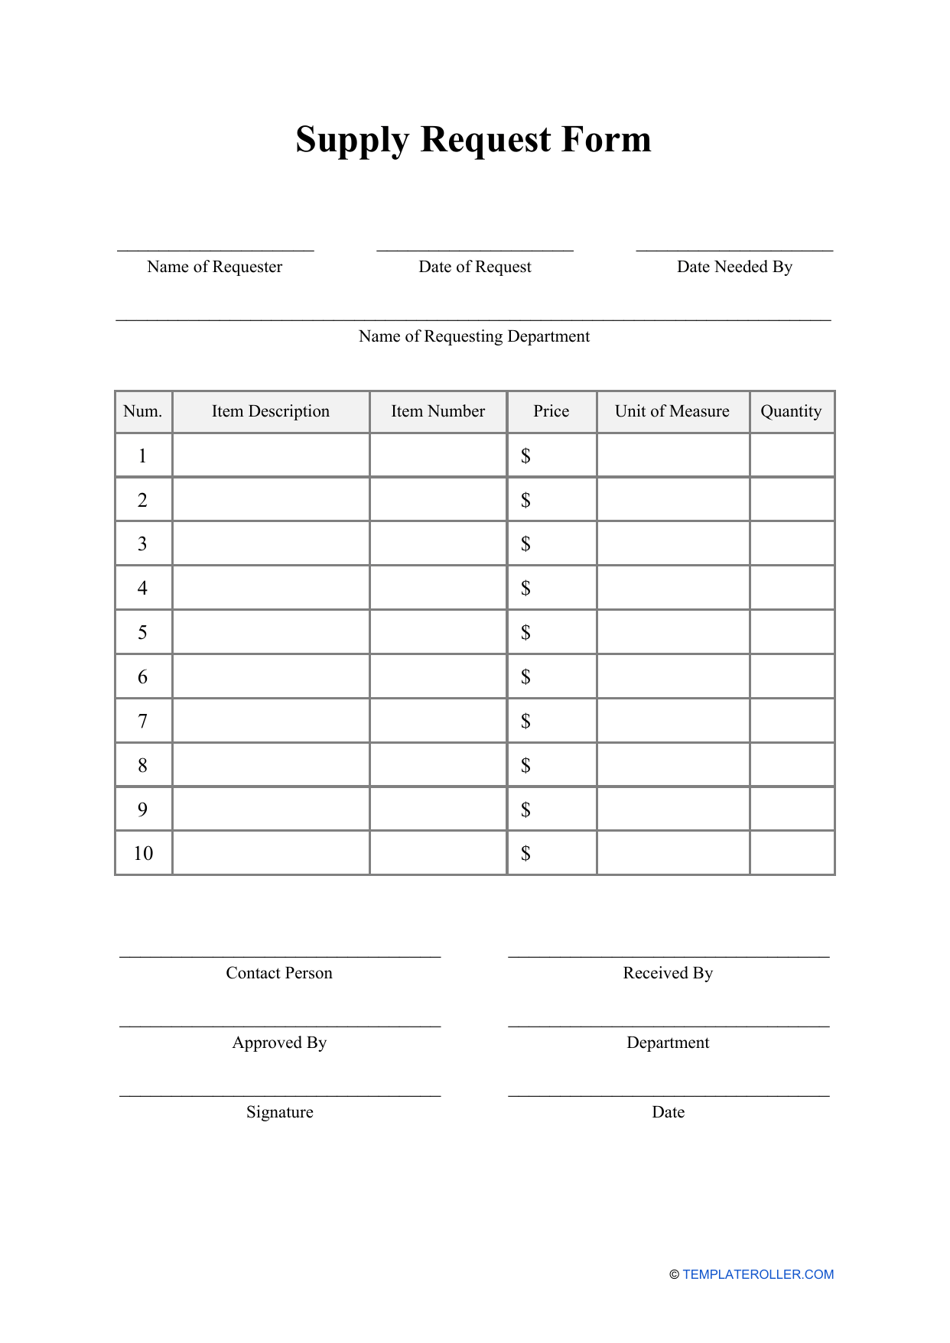 printable-office-supply-request-form